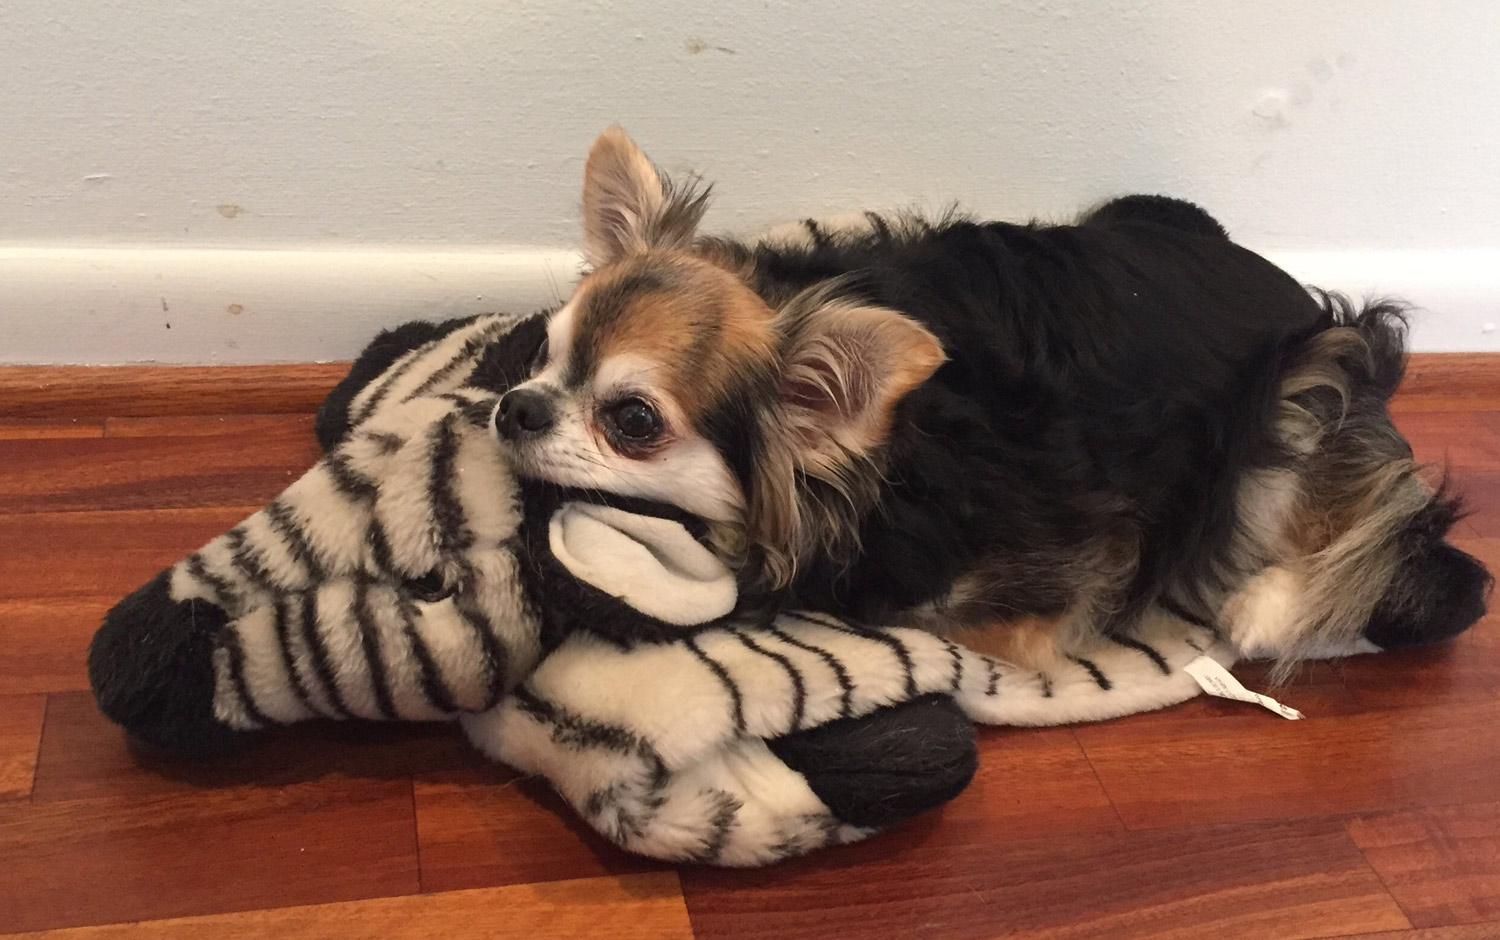 Sharon B. in Houston, TX sent a picture of her brown and black,  long-haired Chihuahua, Angel, resting on top of her snuggly toy zebra – too cute!